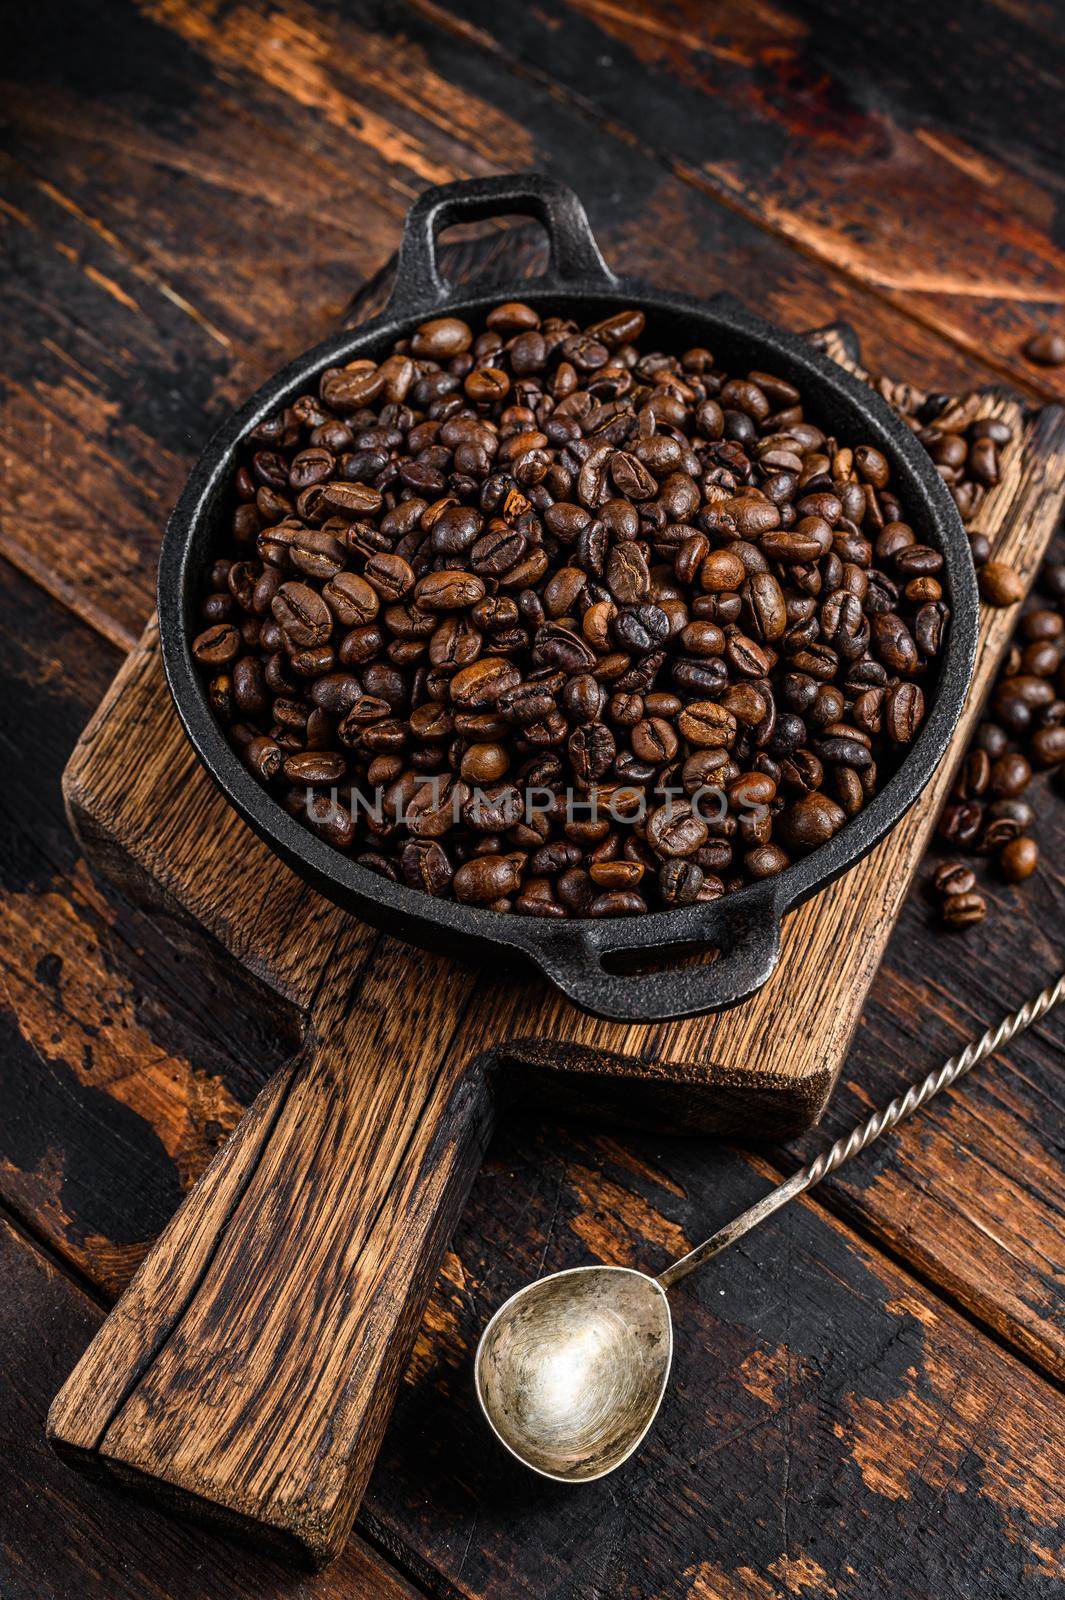 Dark roasted Coffee beans in a pan. Dark wooden background. Top view.